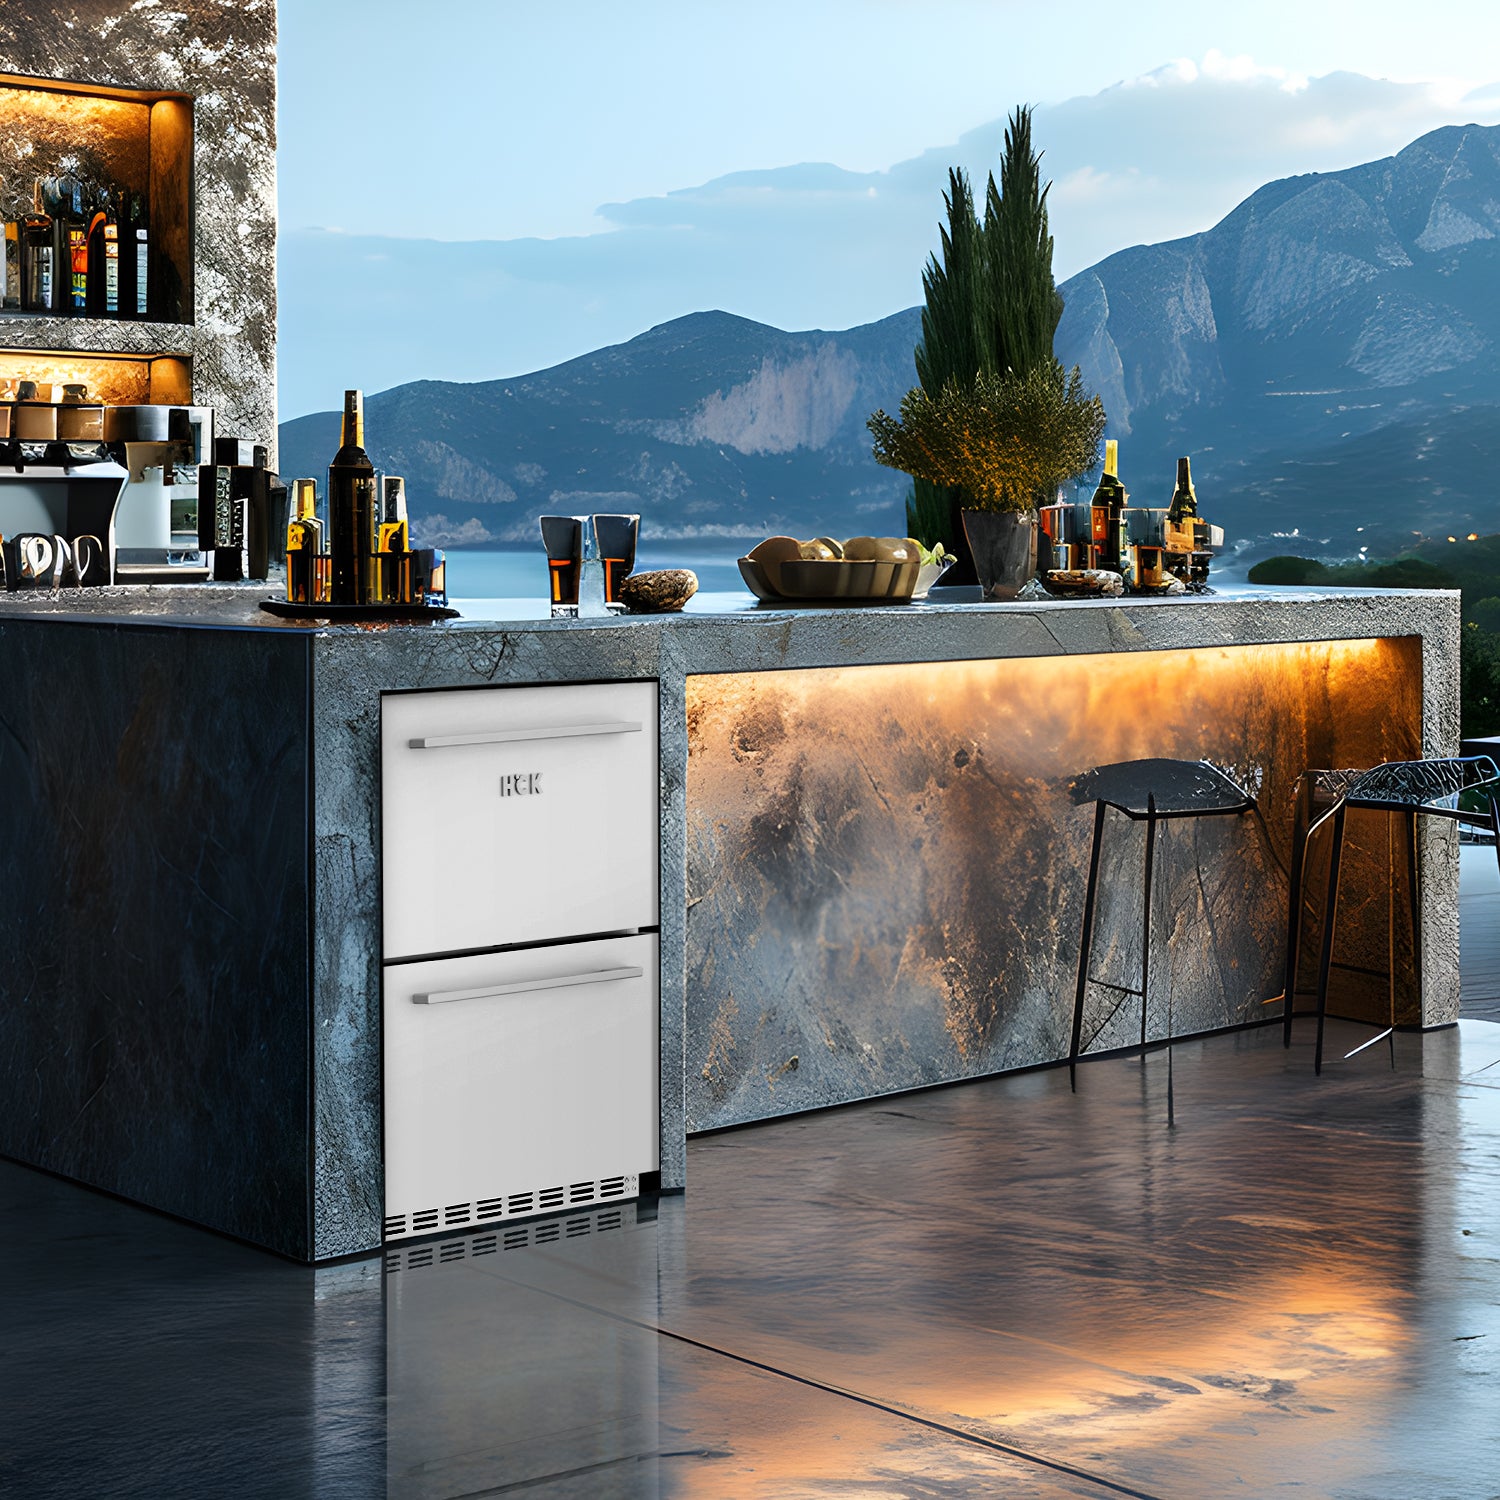 View of a bar setup featuring a 5.12 Cu Ft Undercounter Beverage Outdoor Refrigerator Drawer Design installed beneath the table. The table is decorated with bottles of wine and decorations